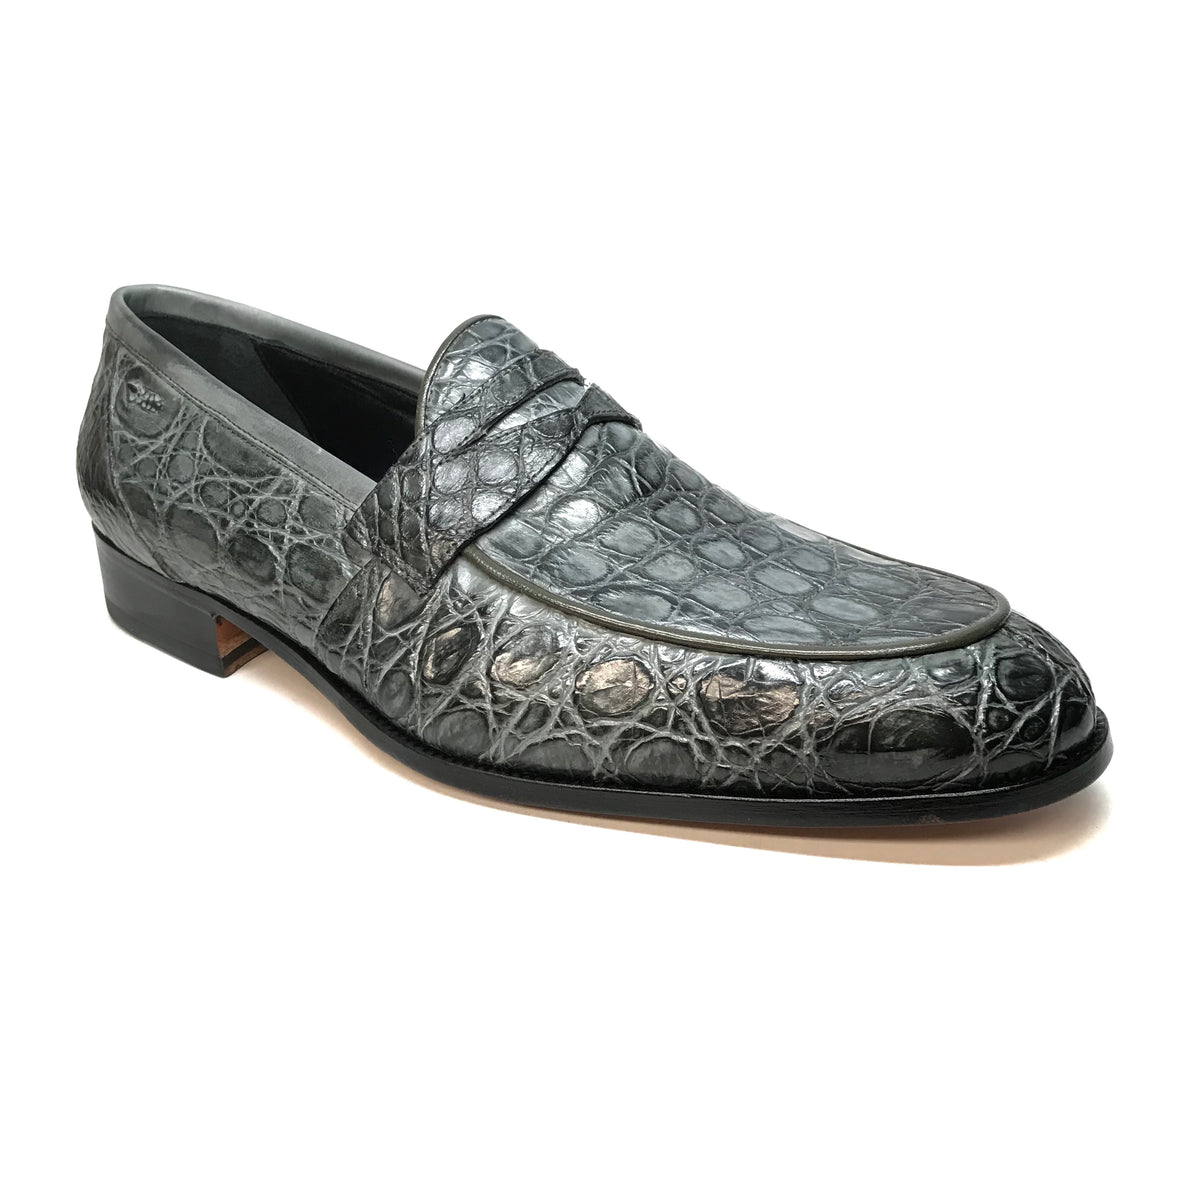 Mauri 4862 Forest Green Crocodile Belly Penny Loafers - Dudes Boutique